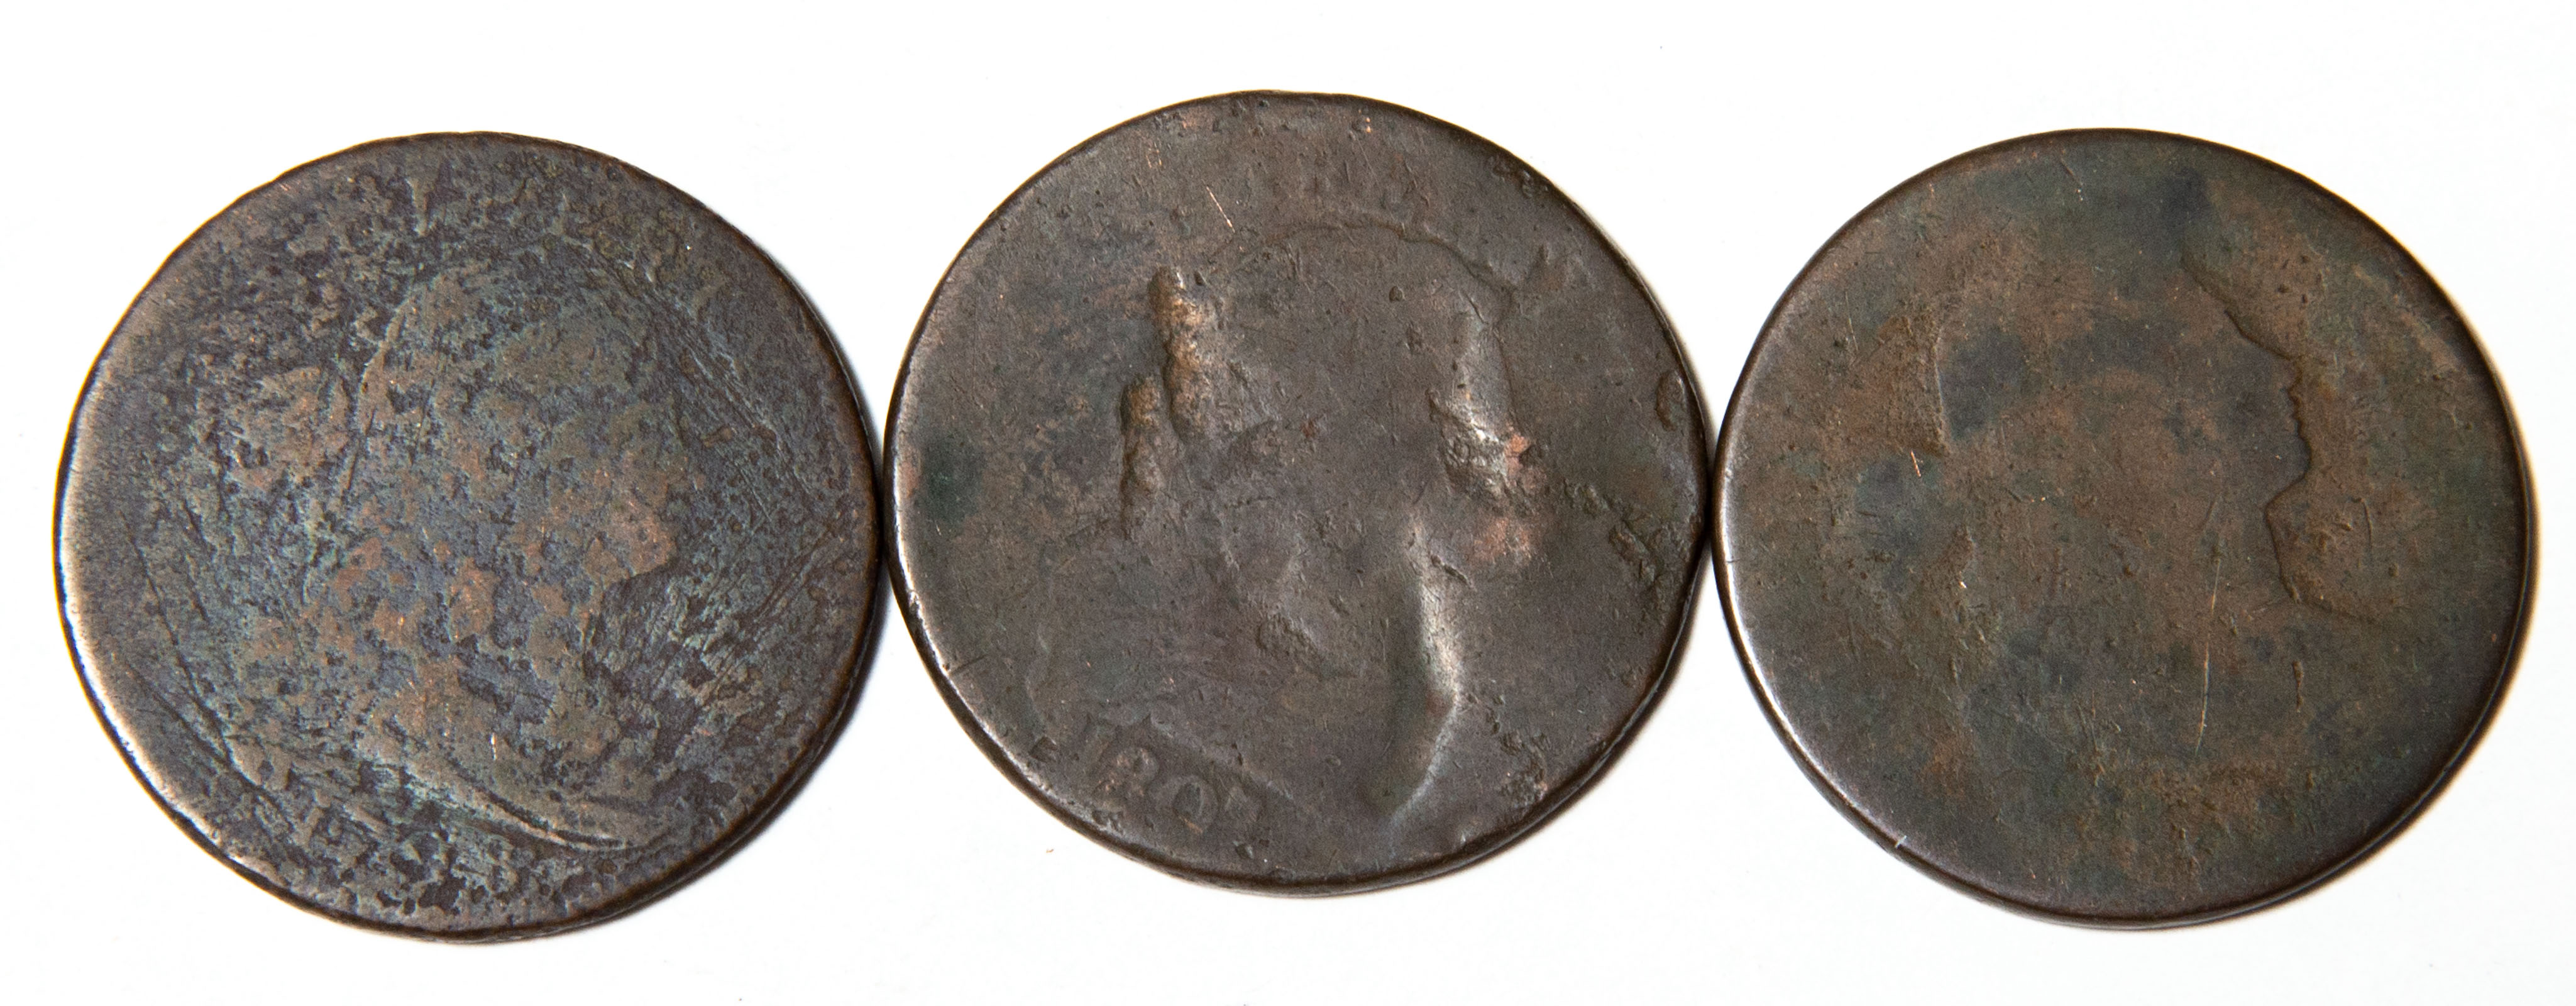 THREE DRAPED BUST LARGE CENTS WITH 3345a5